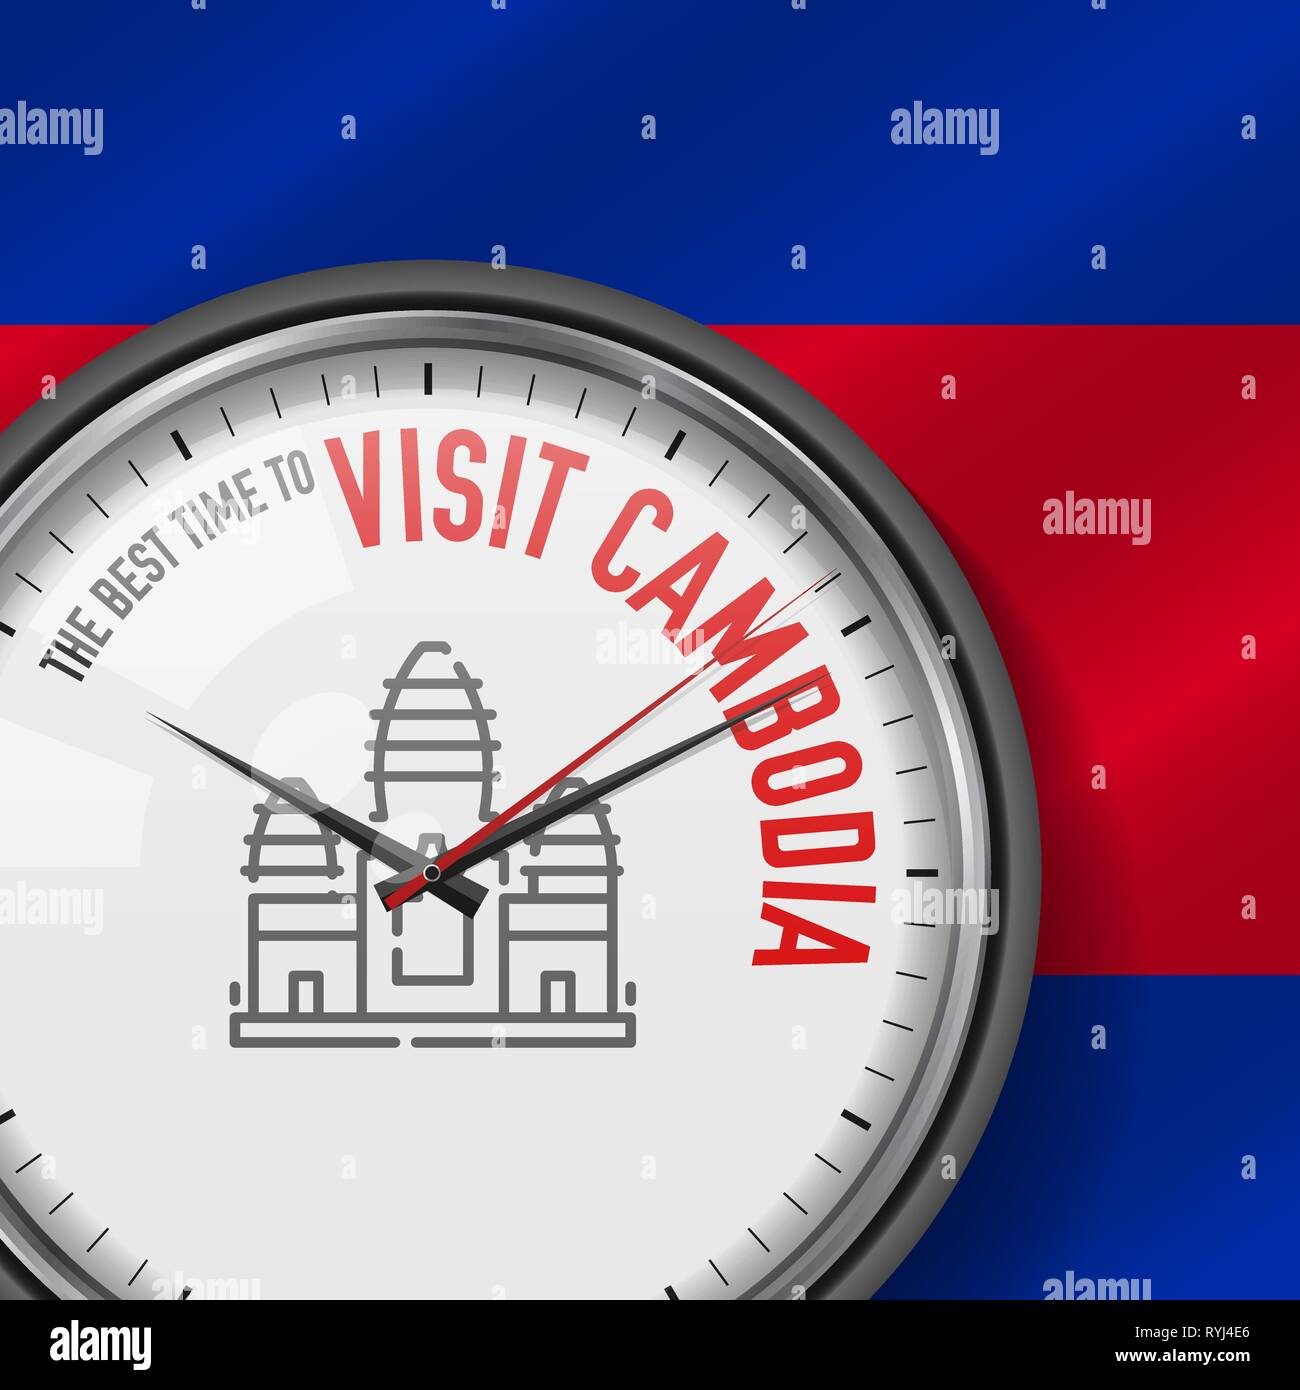 The Best Time for Visit Cambodia. White Vector Clock with Motivational Slogan. Analog Metal Watch with Glass. Vector Illustration on Cambodian Flag Stock Vector